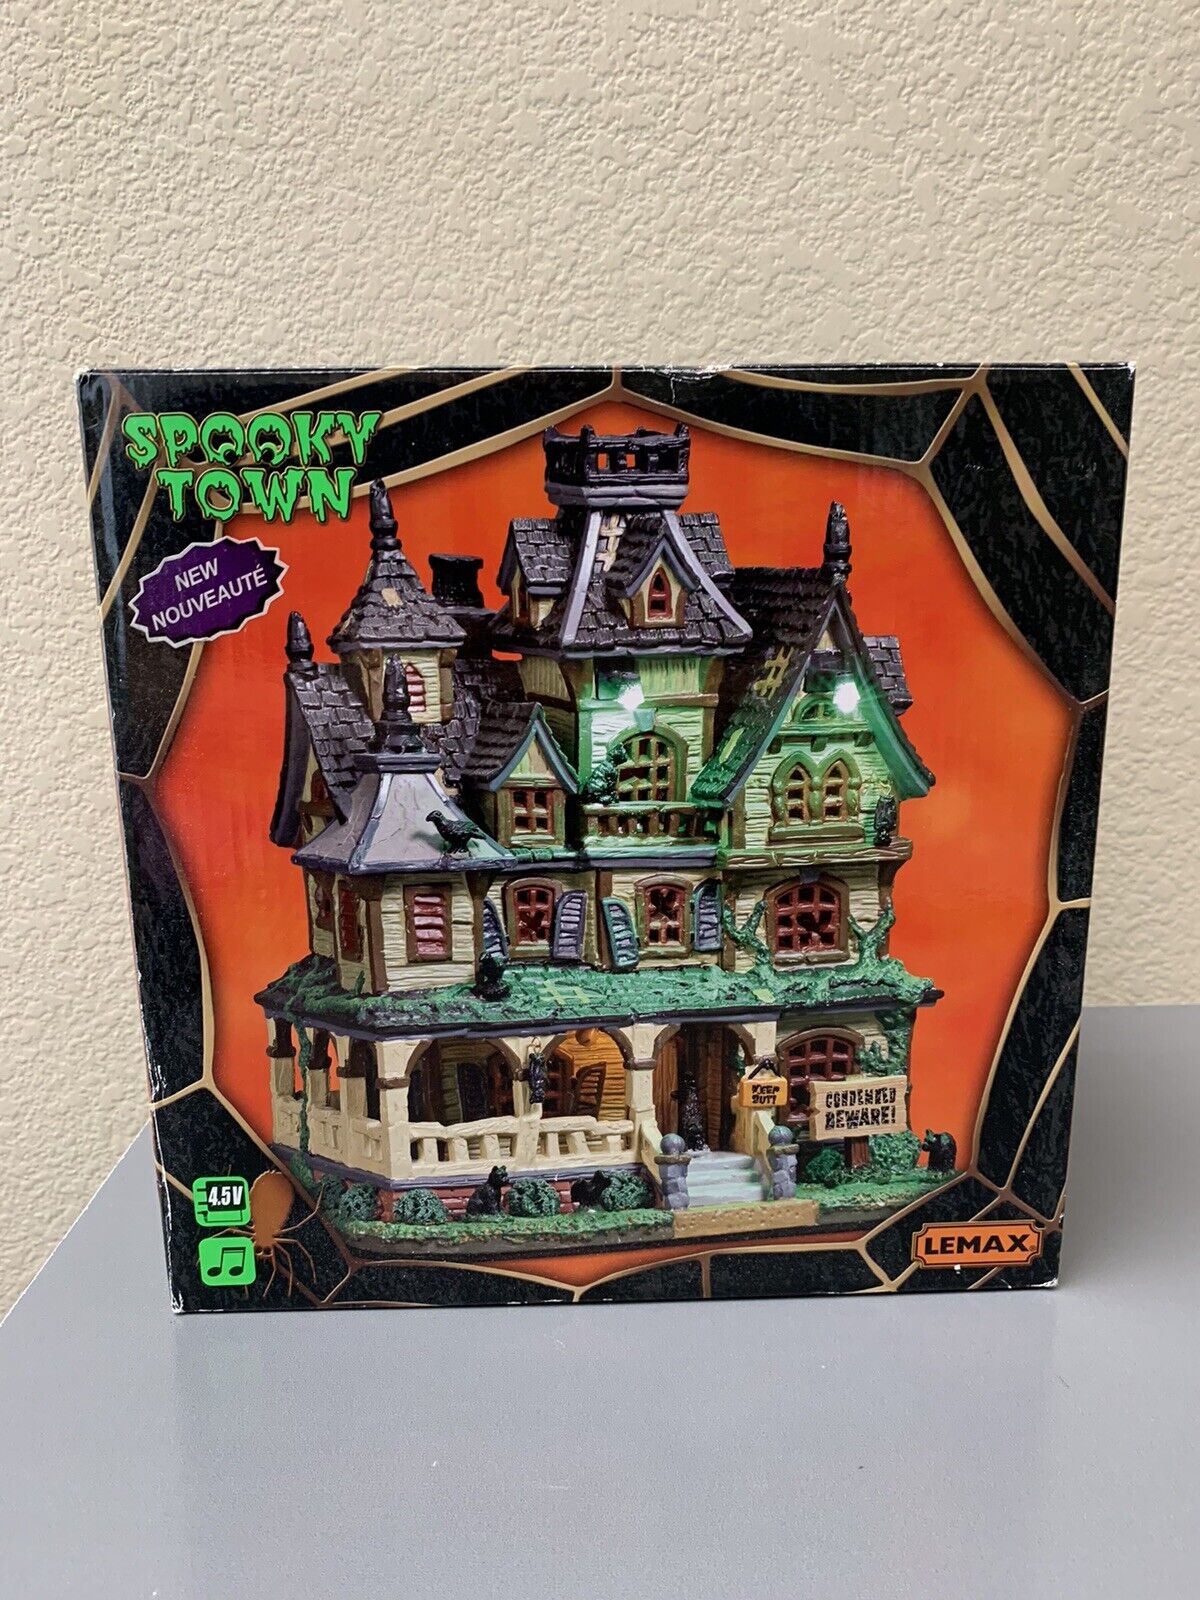 2017 Lemax Spooky Town Halloween Lighted Haunted Mansion #75173 RETIRED Tested